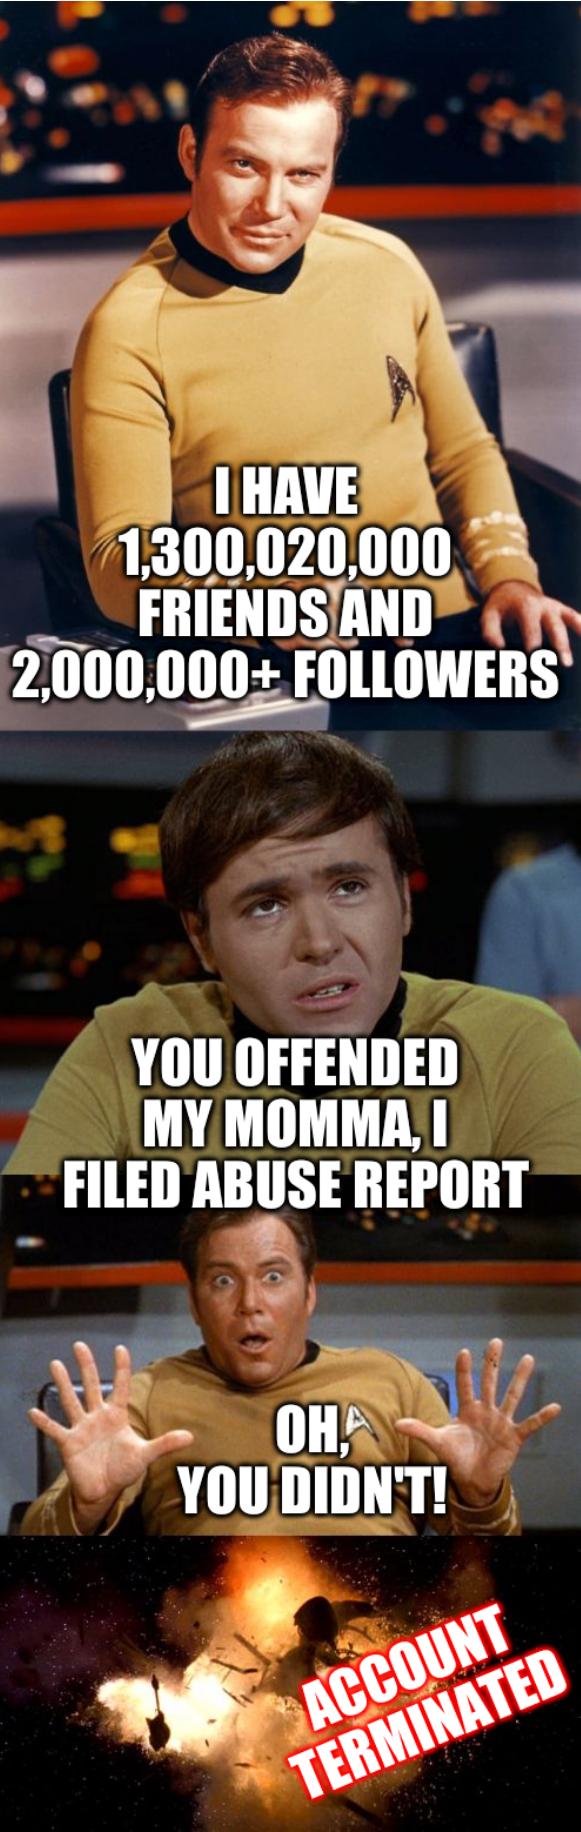 Samsung Star Trek: I have 1,300,020,000 friends and 2,000,000+ followers; You offended my momma, I filed abuse report; Oh, you didn't! Account terminated